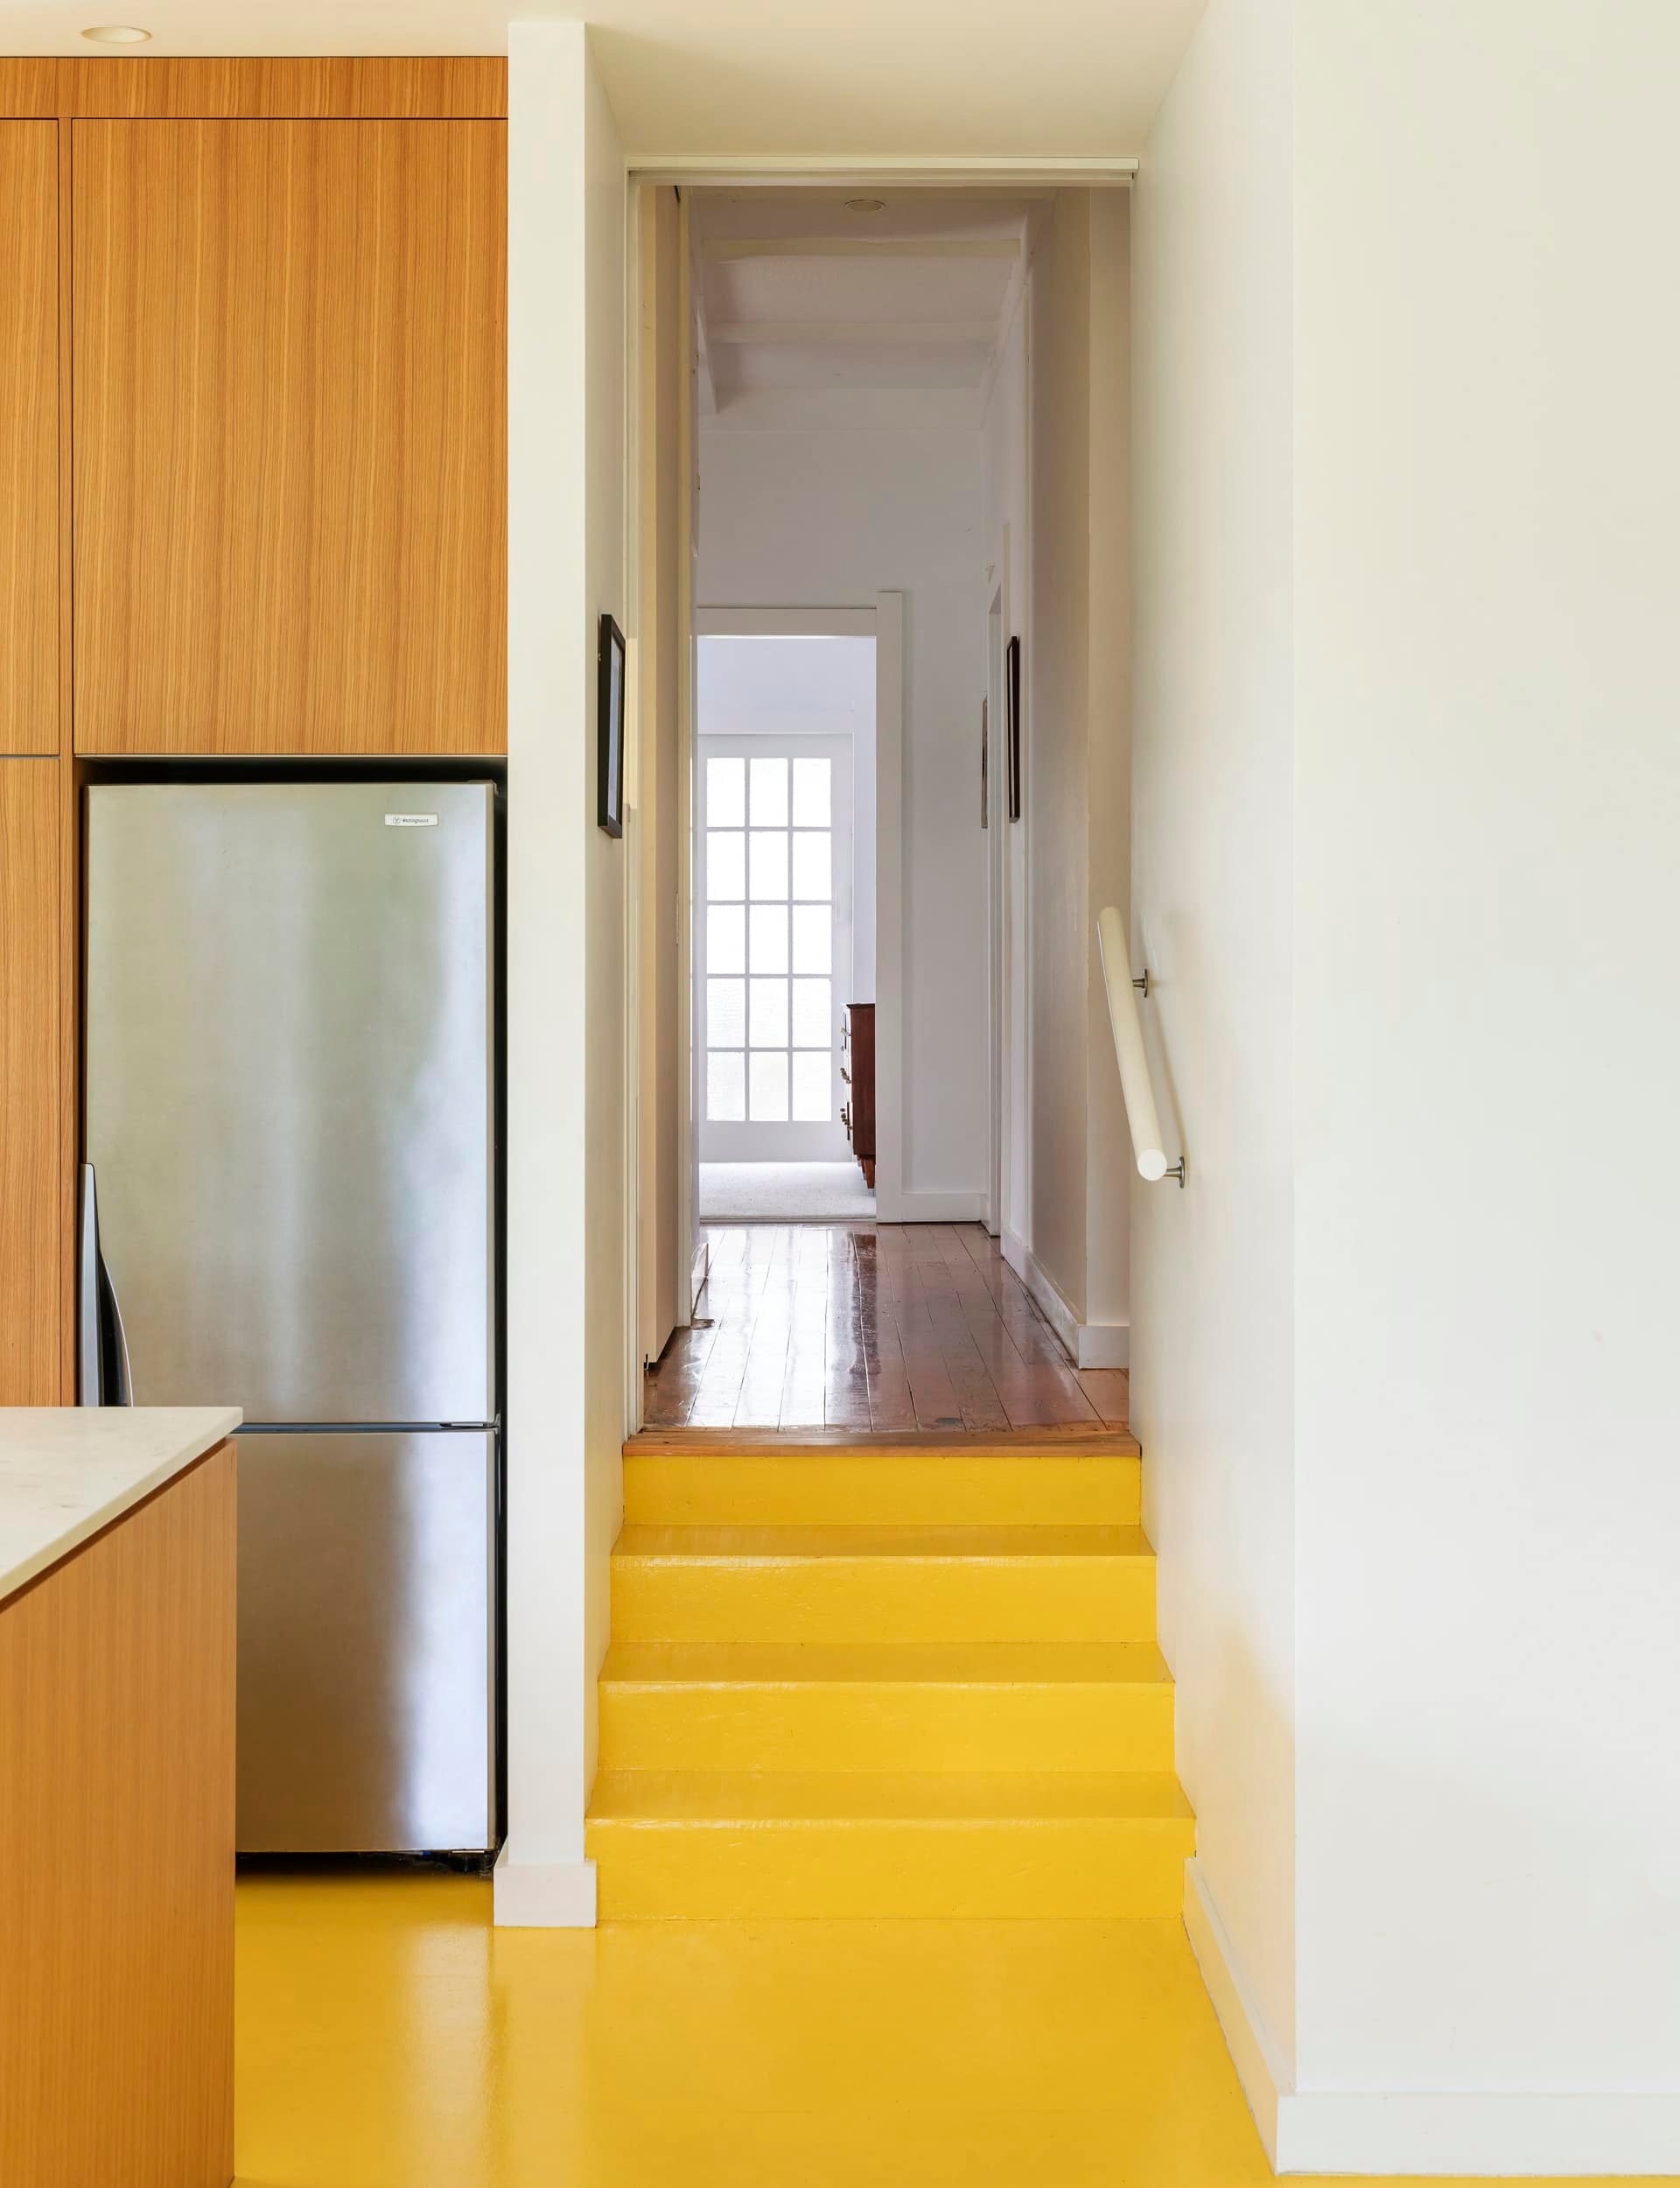 Hallway that connects to a small set of yellow stairs to the yellow kitchen floor